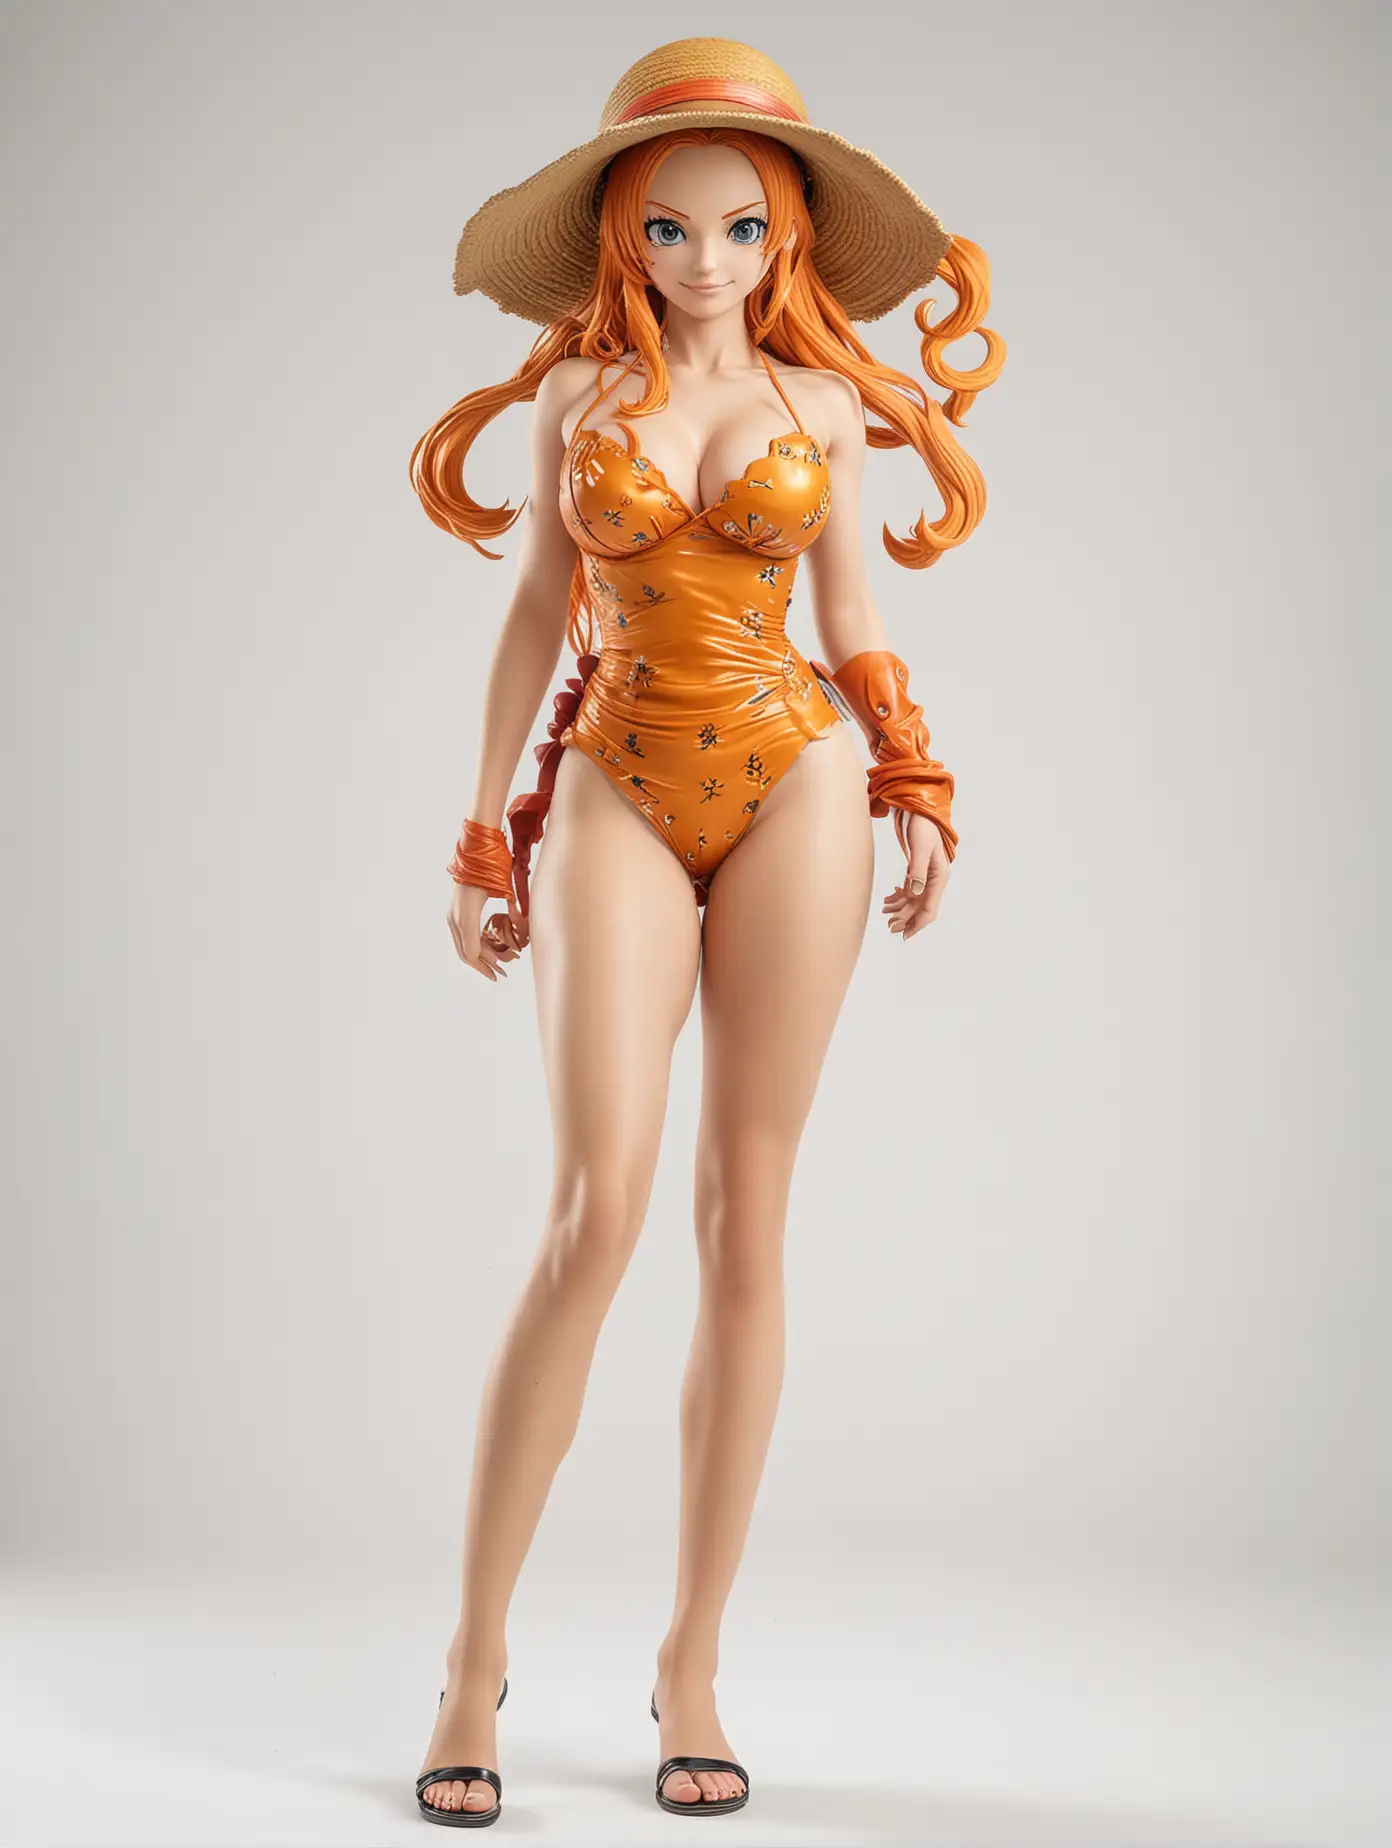 Full-body-shot-of-Nami (One Piece)-on-a-white-background-ensure-the-entire-body-including-head-torso-arms-legs-and-feet-is-fully-visible-in-the-frame